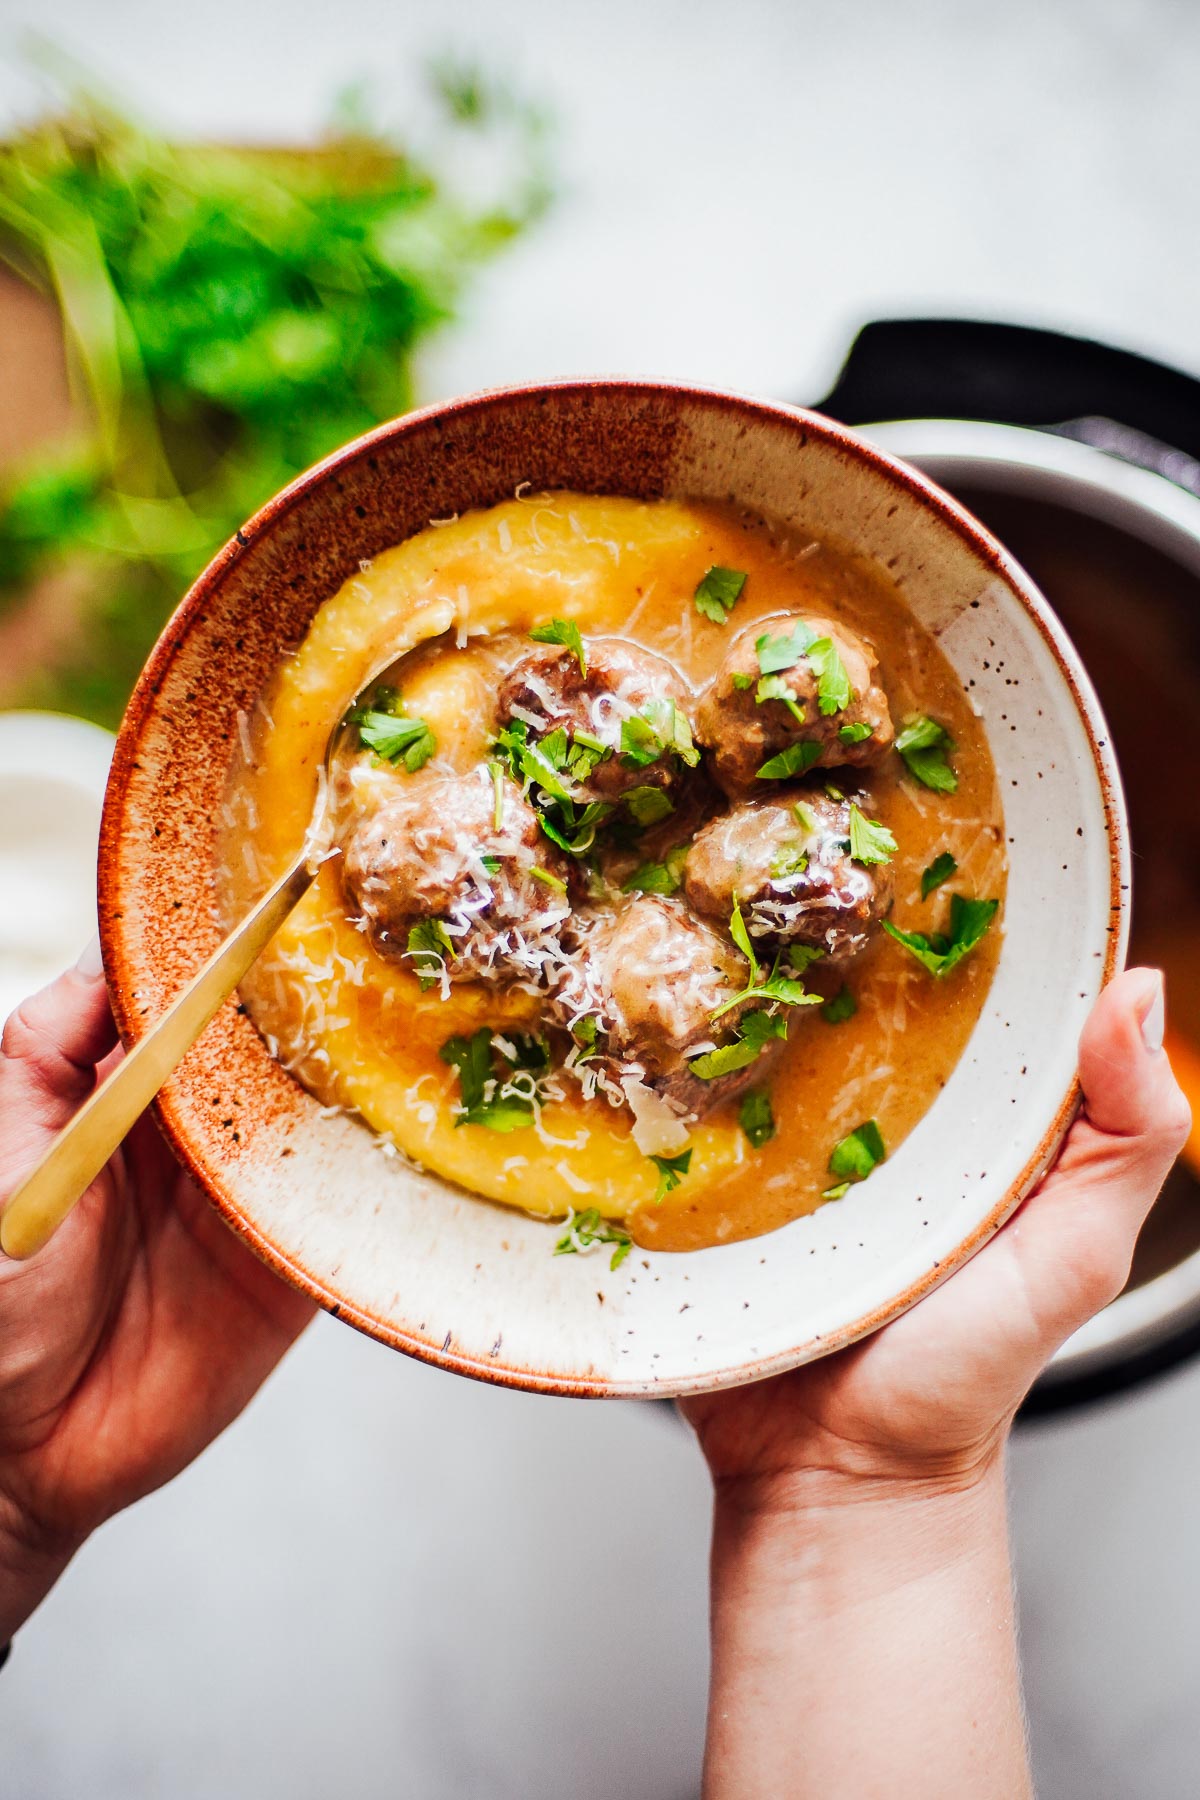 Cooked Swedish meatballs in a gravy sauce served over polenta in a brown ceramic bowl.